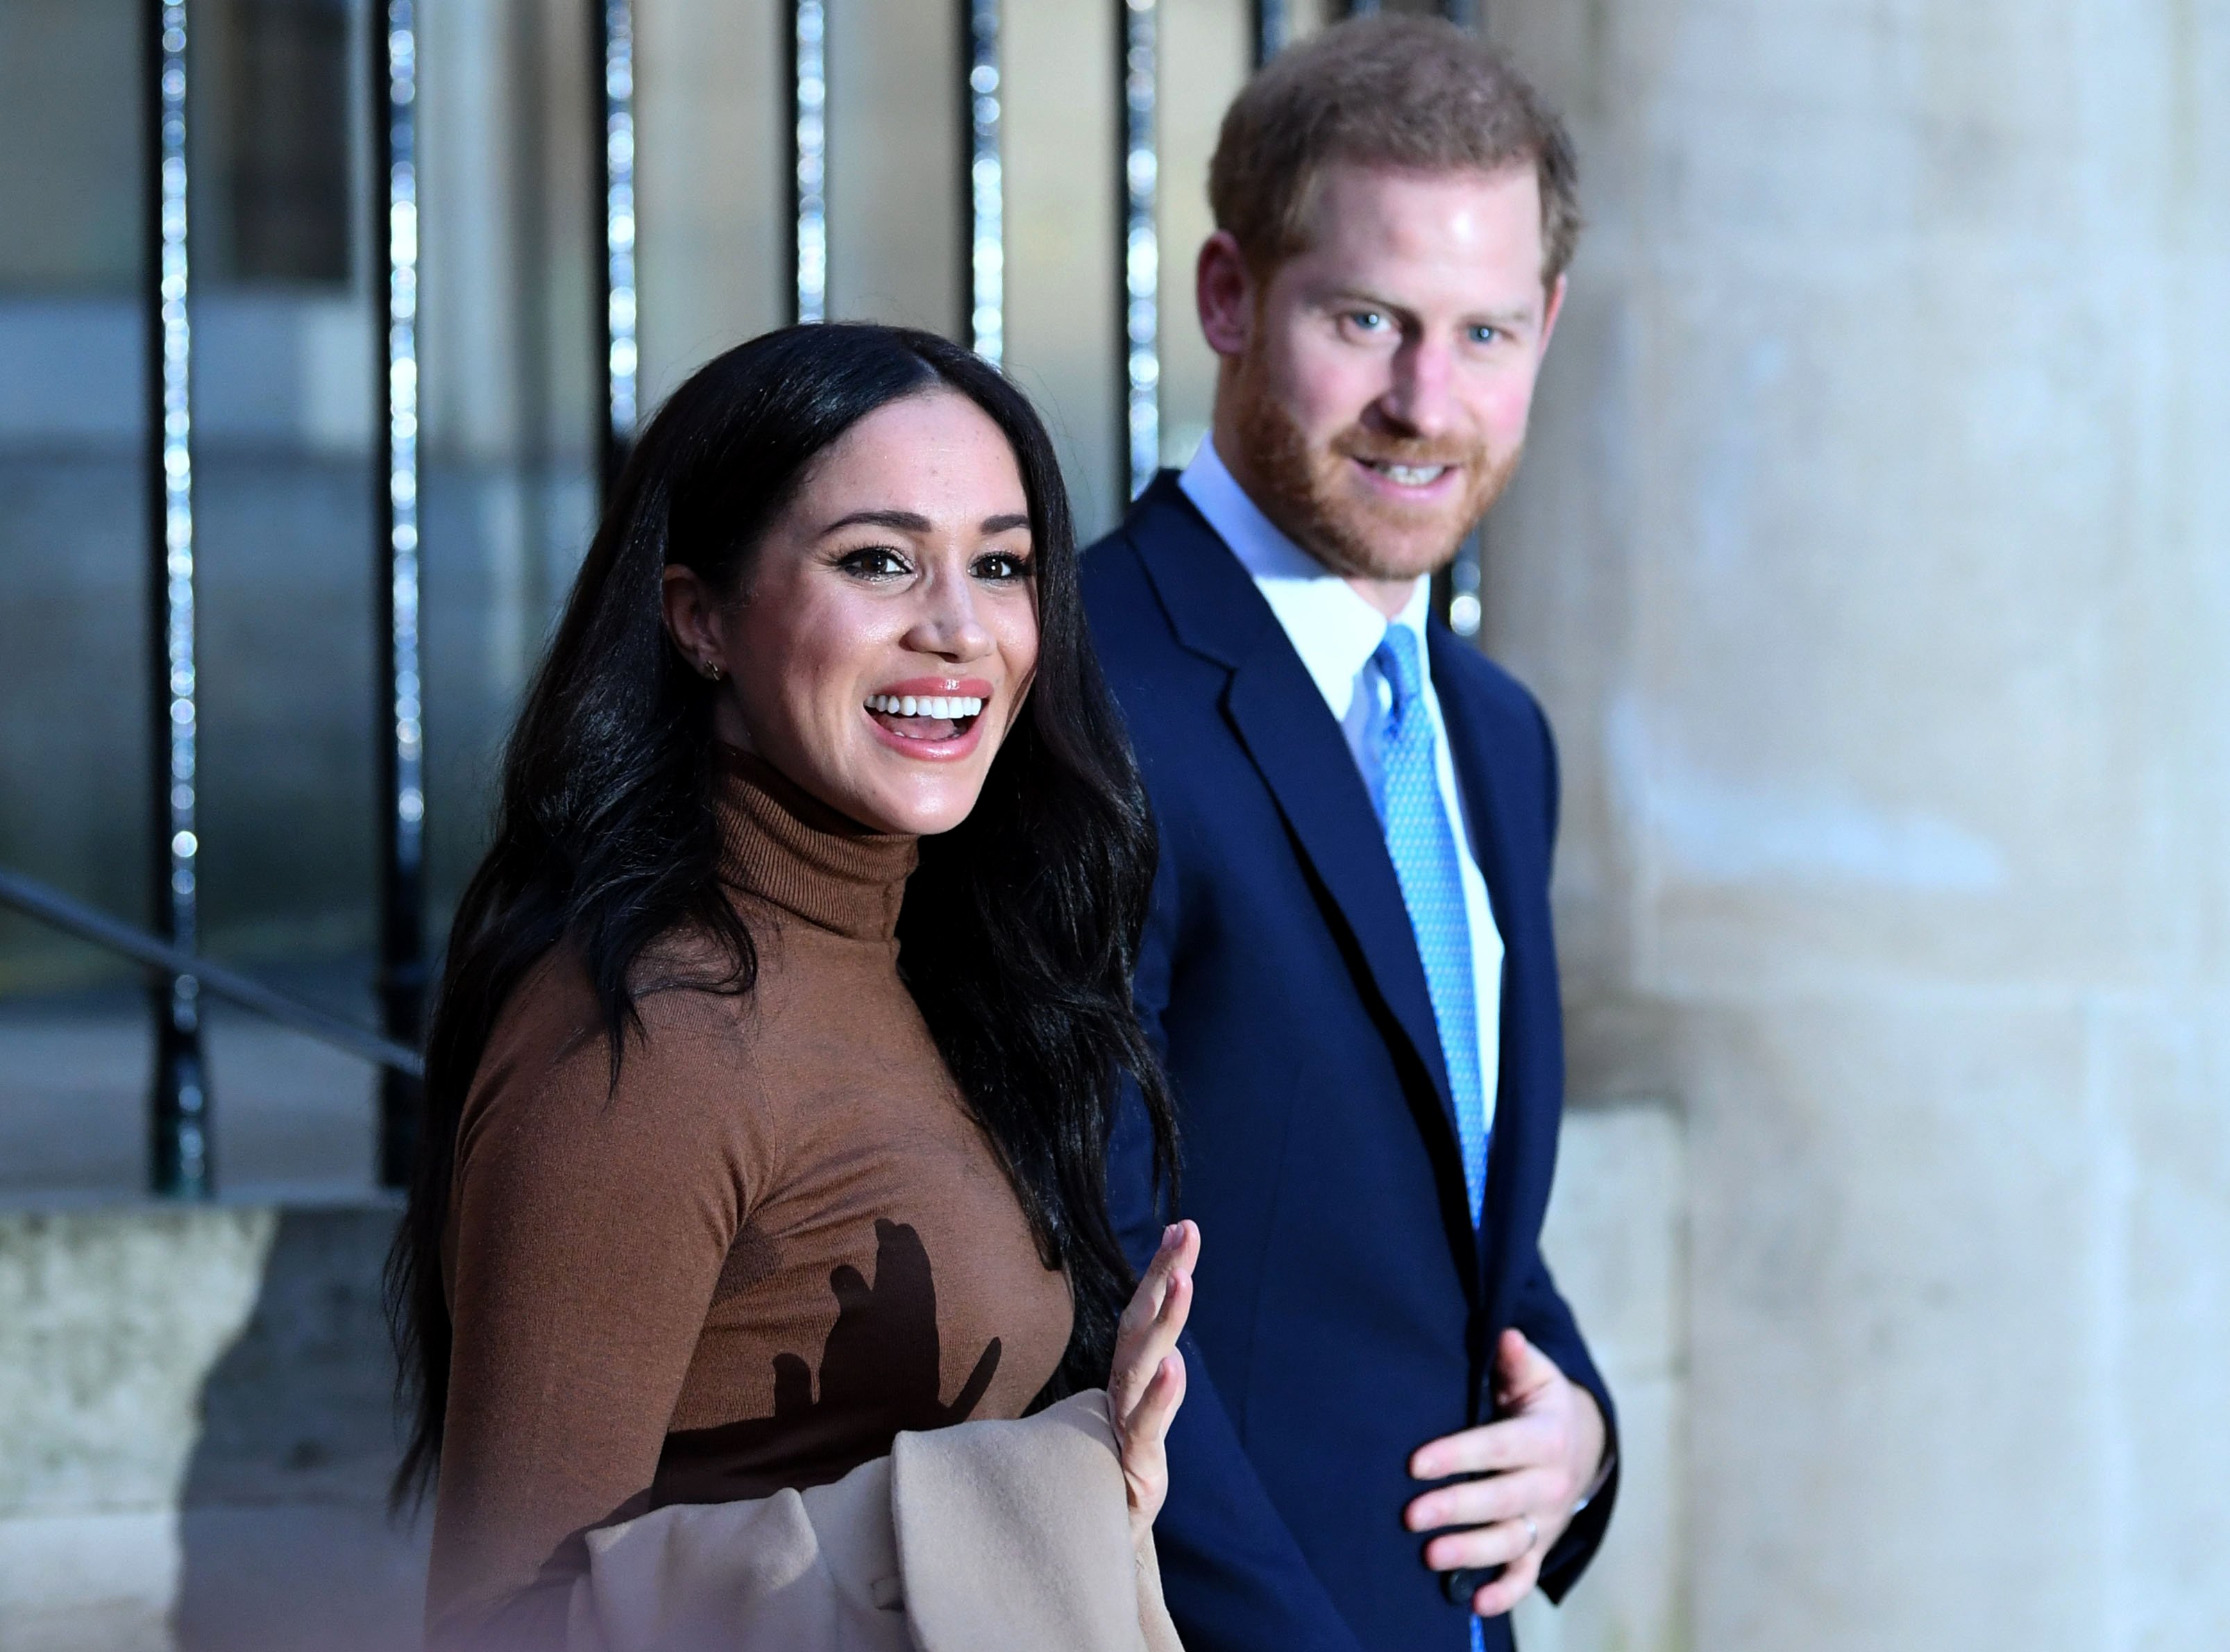 Meghan Markle and Prince Harry visit Canada House on January 7, 2020, in London, England. | Source: Getty Images.